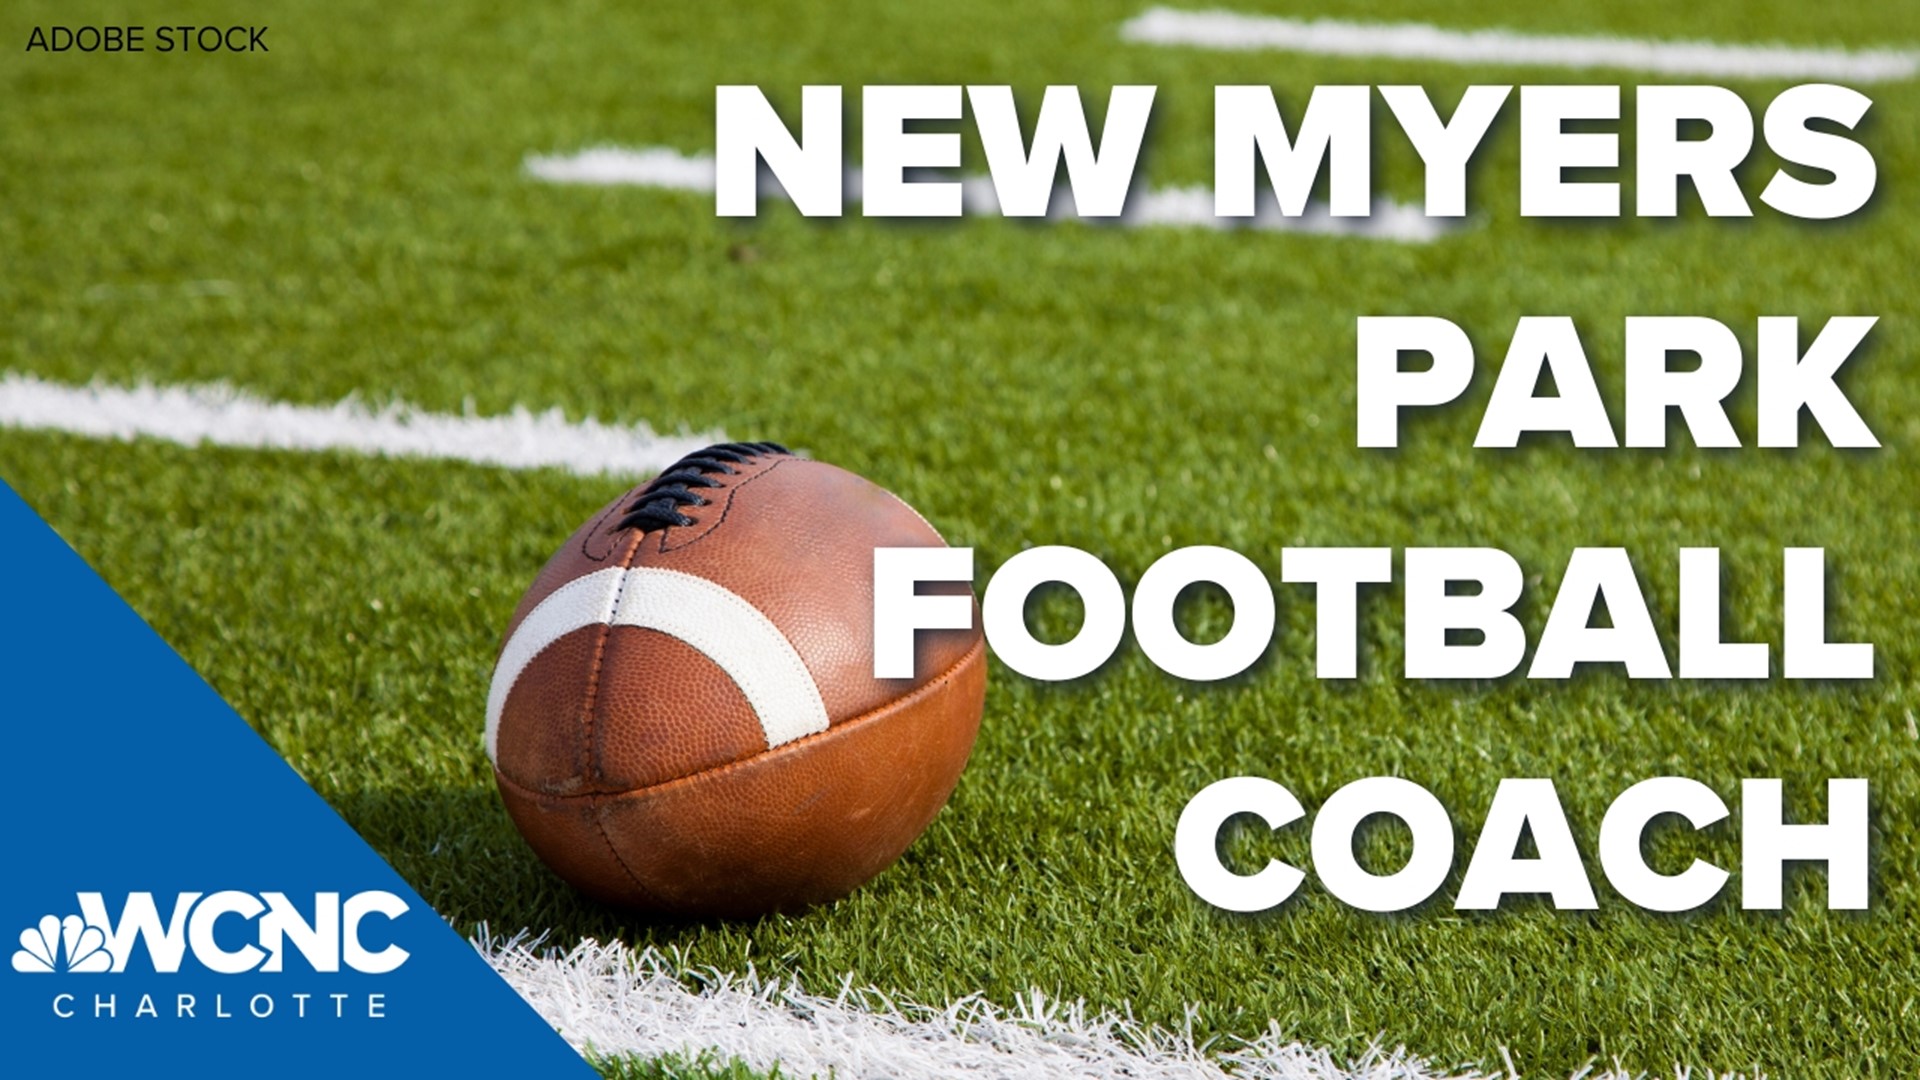 Jason McManus has been hired to lead Myers Park's football program after the school was required to forfeit the 2021-22 season due to eligibility violations.